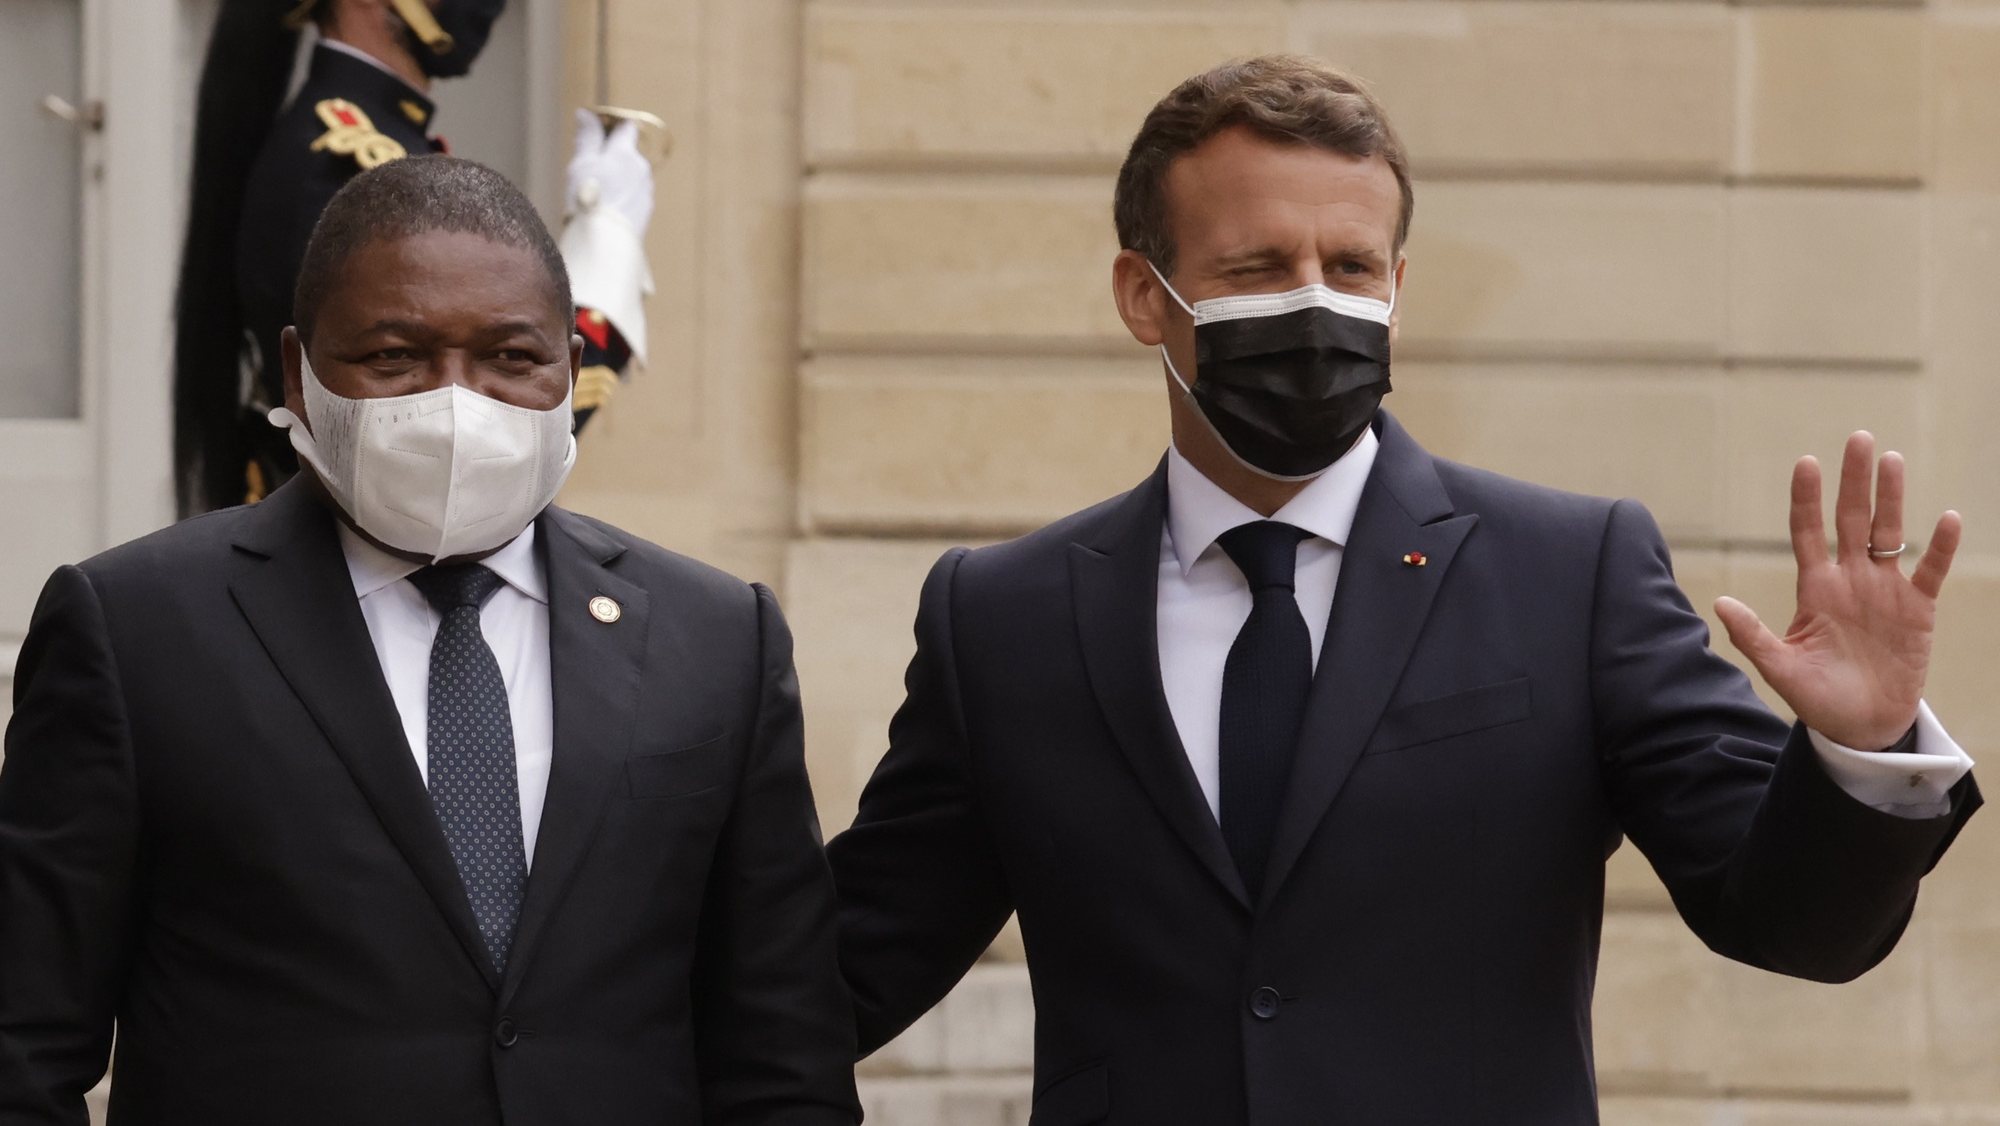 epa09207492 French President Emmanuel Macron (R) welcomes Mozambique&#039;s President Filipe Nyusi (L), before a dinner at the Elysee Palace folowing a summit on the African Economy financing in Paris, France, 17 May 2021.  EPA/YOAN VALAT